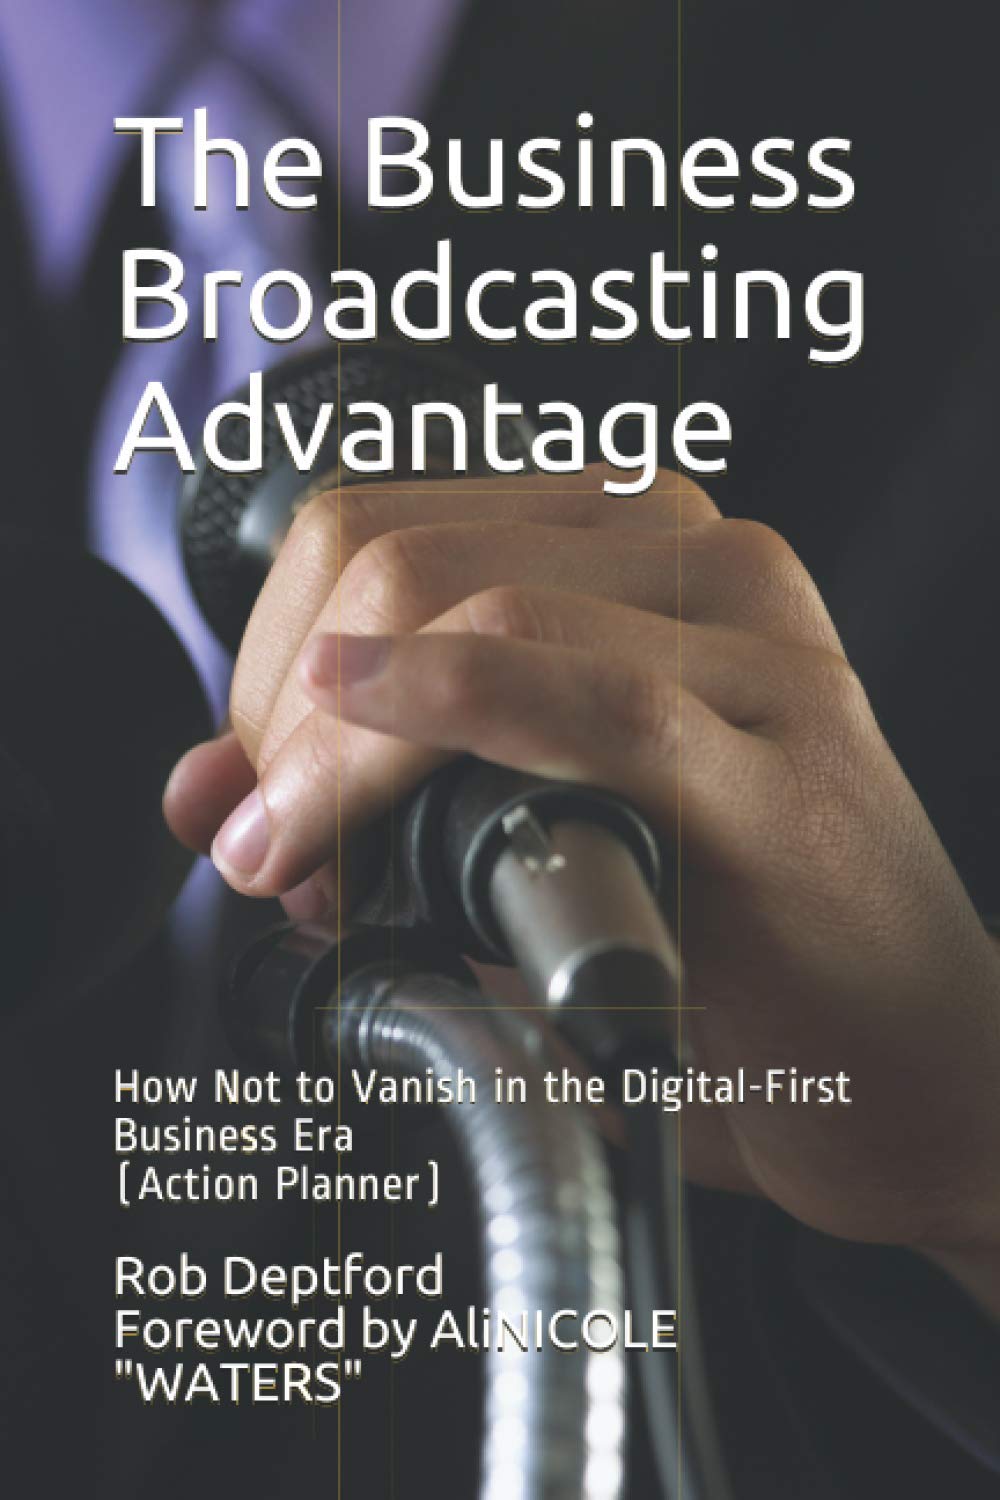 Picture of The Business Broadcasting Advantage book by Rob Deptford